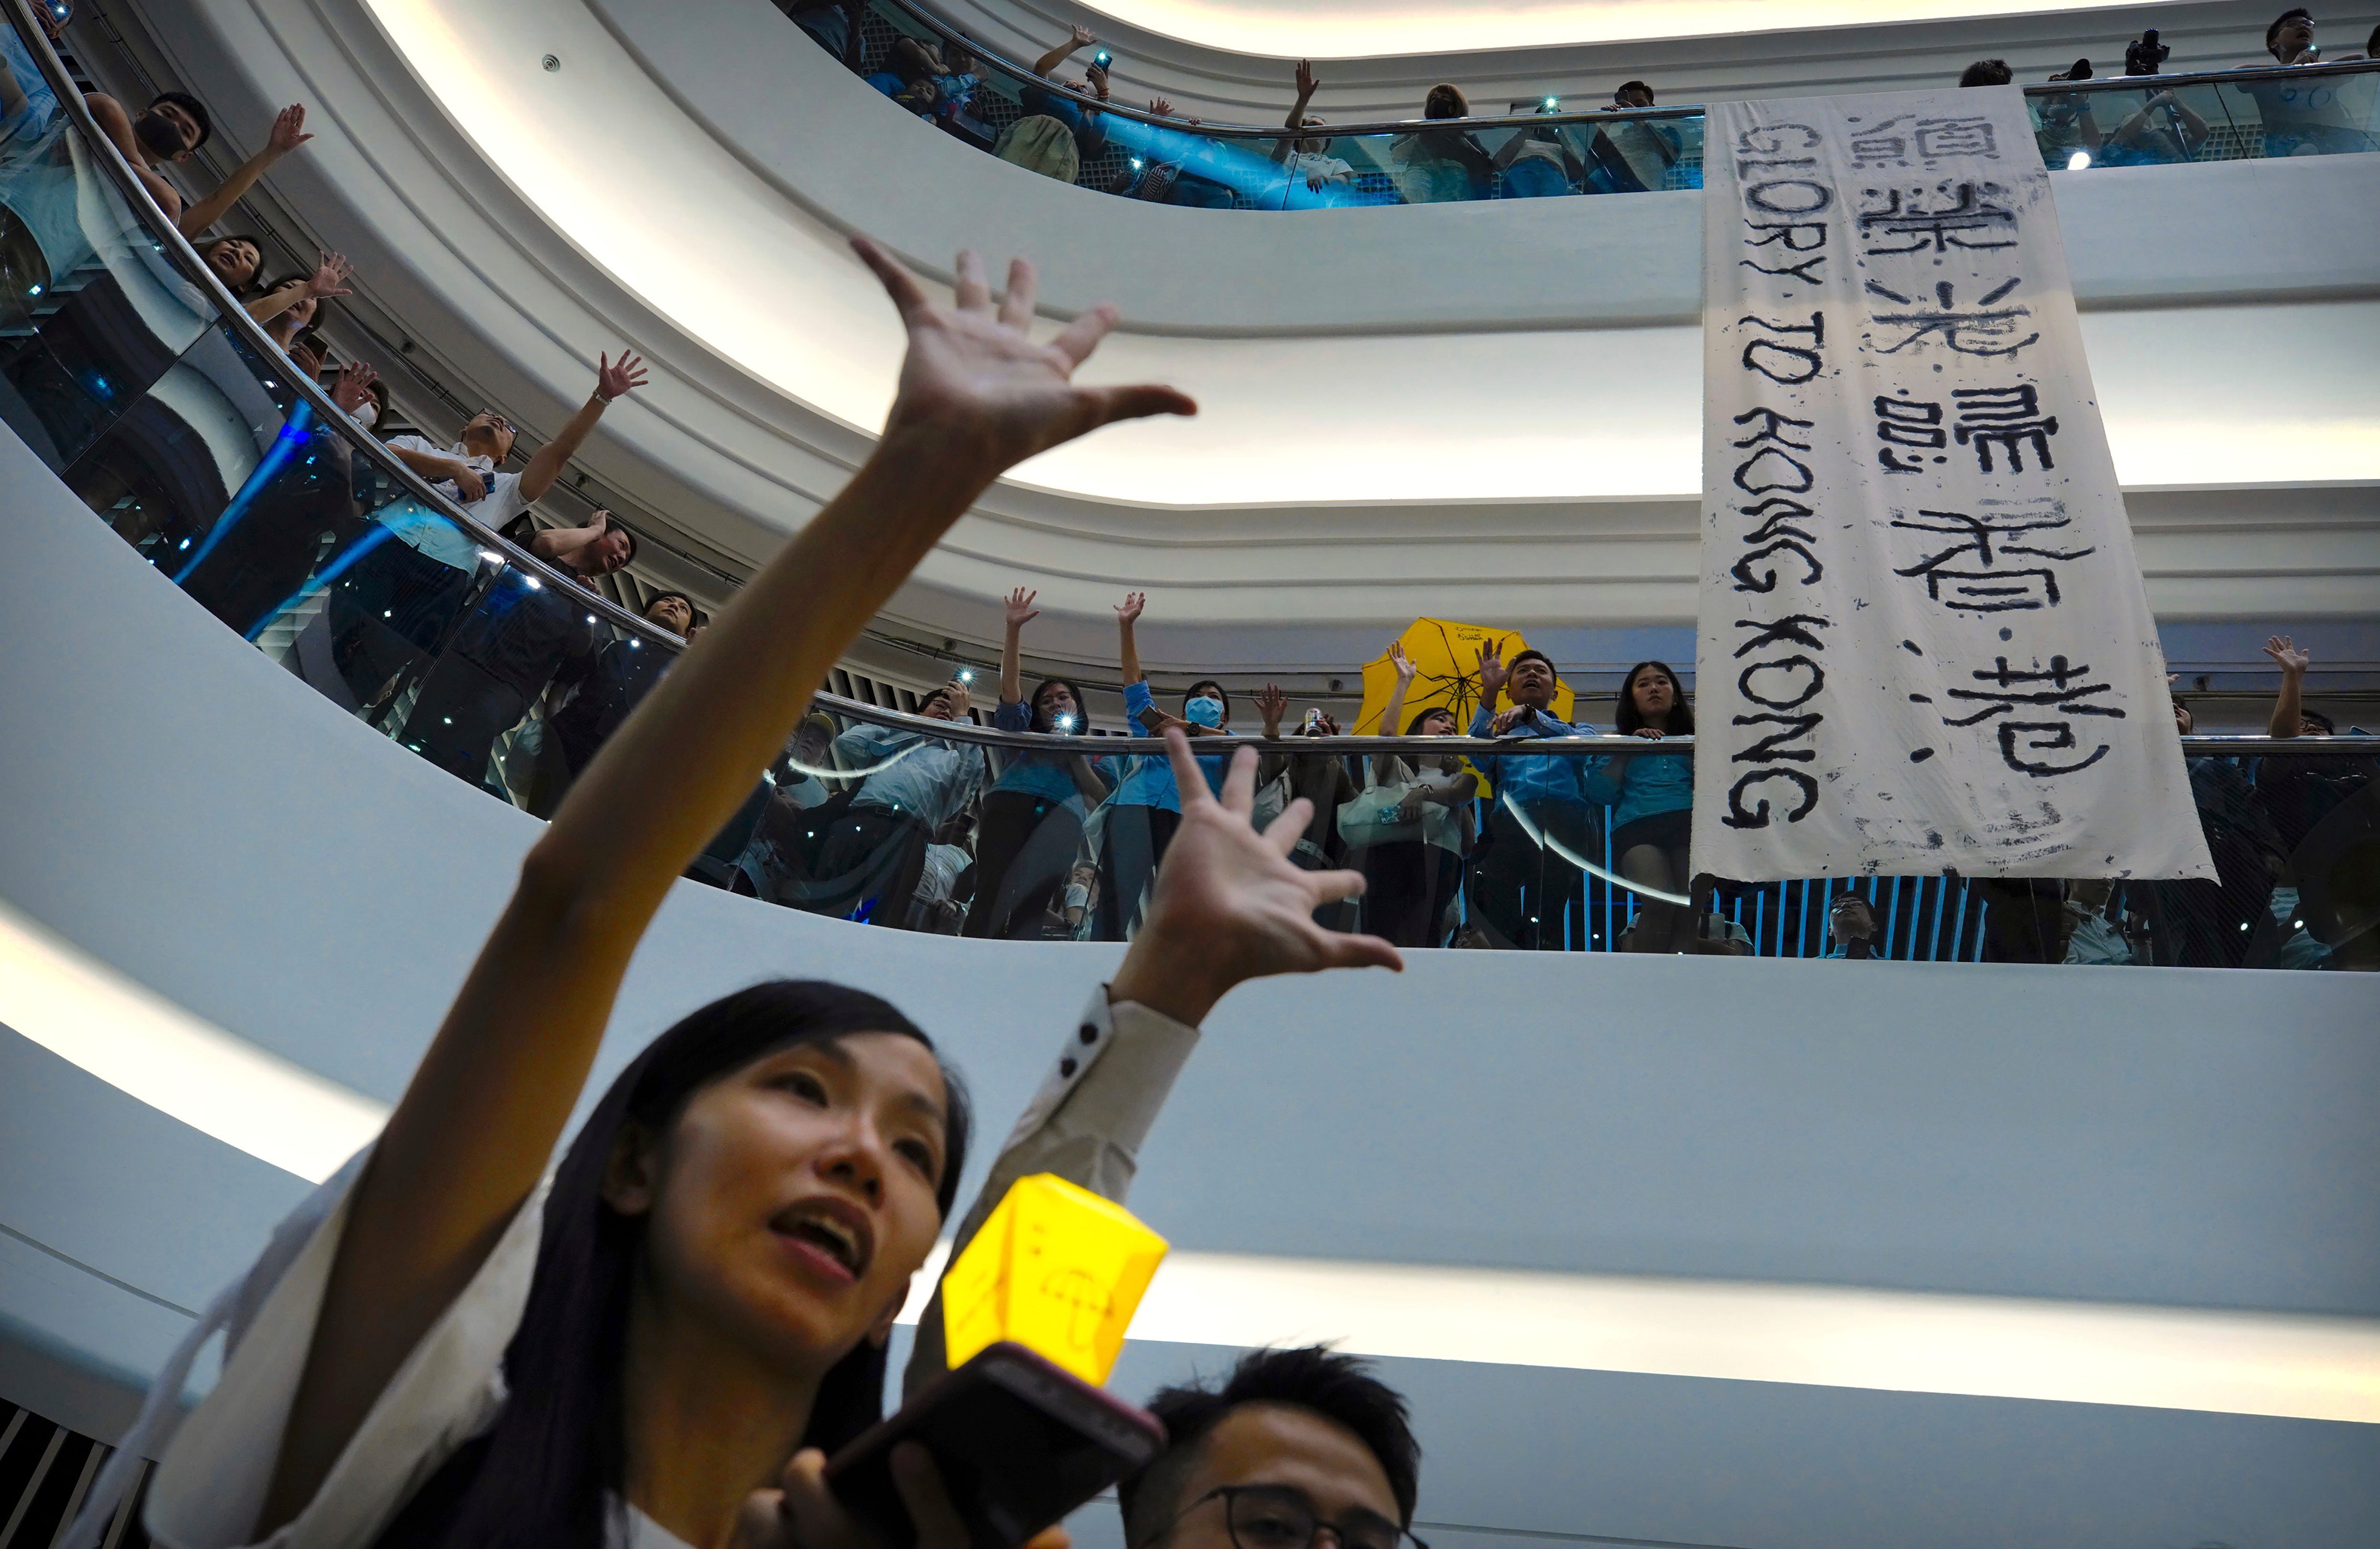 “Glory to Hong Kong” was often sung by demonstrators during months of anti-government protests in 2019. It was later mistakenly played as the city’s anthem at international sporting events